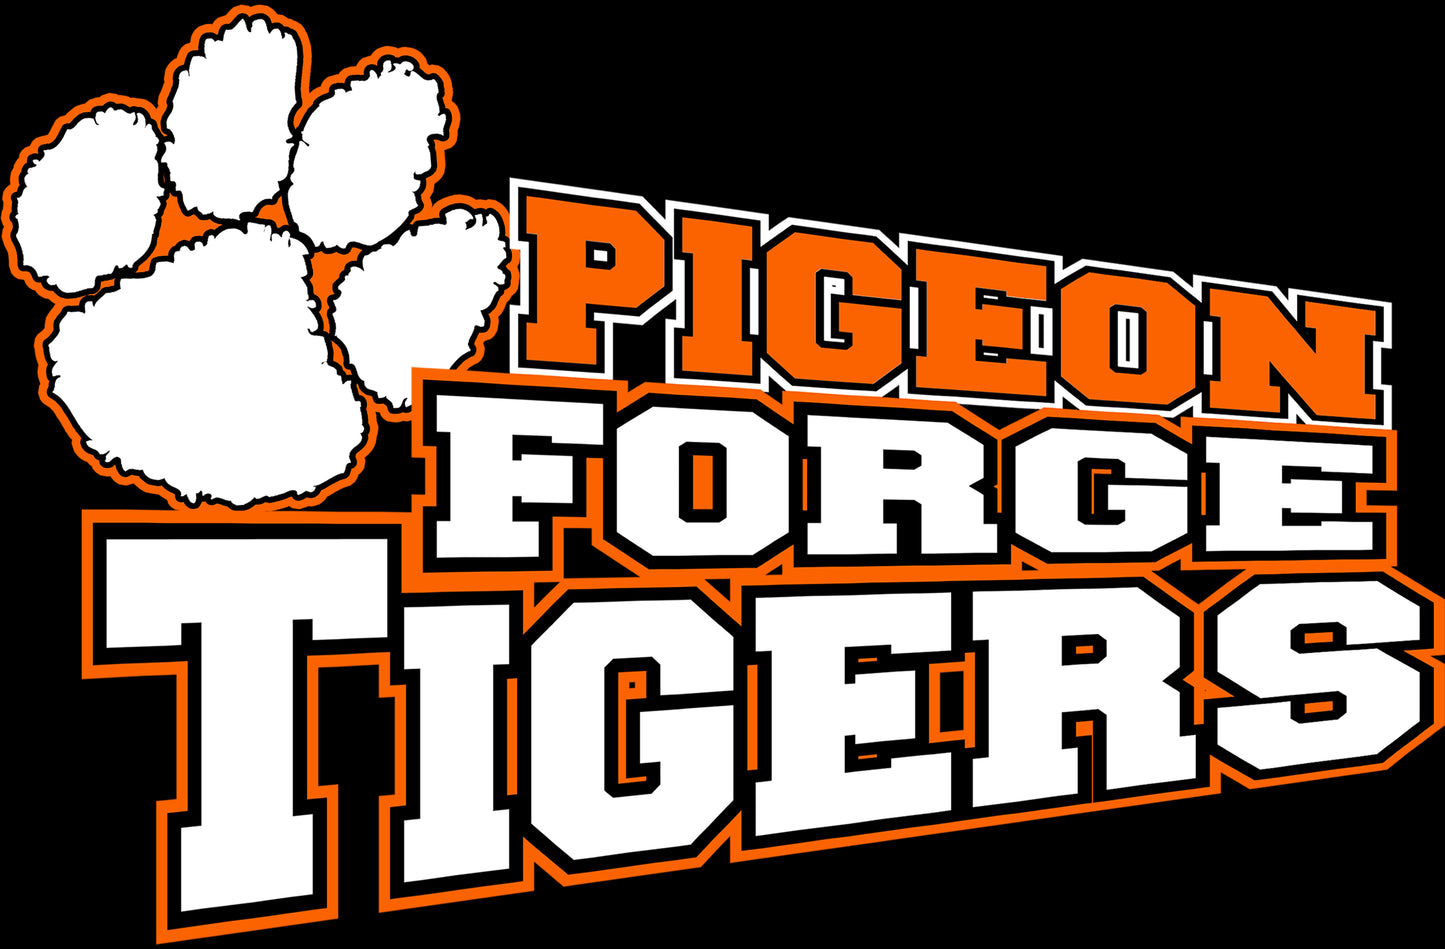 Pigeon Forge Tigers